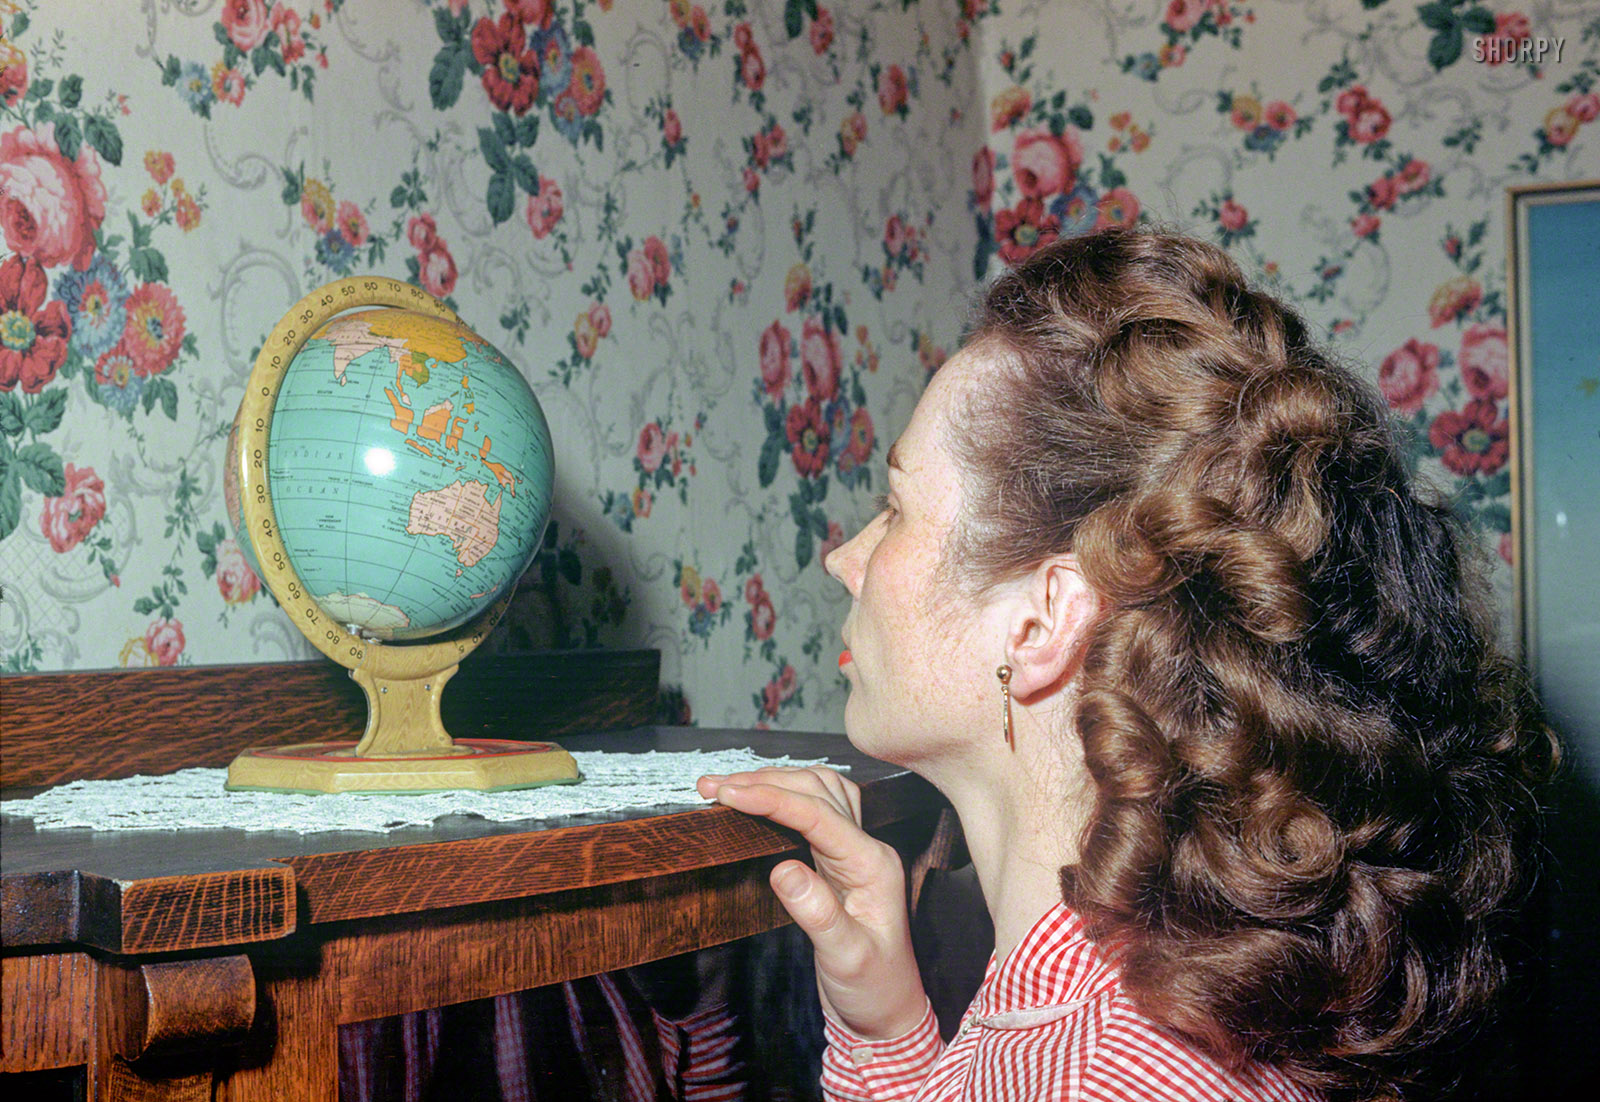 "28 Feb 1952 -- Maurine." Whose husband, Leslie, we met here. This latest episode of Minnesota Kodachromes brings us yet another variation on floral wallpaper. 35mm color slide by Hubert Tuttle.  View full size.